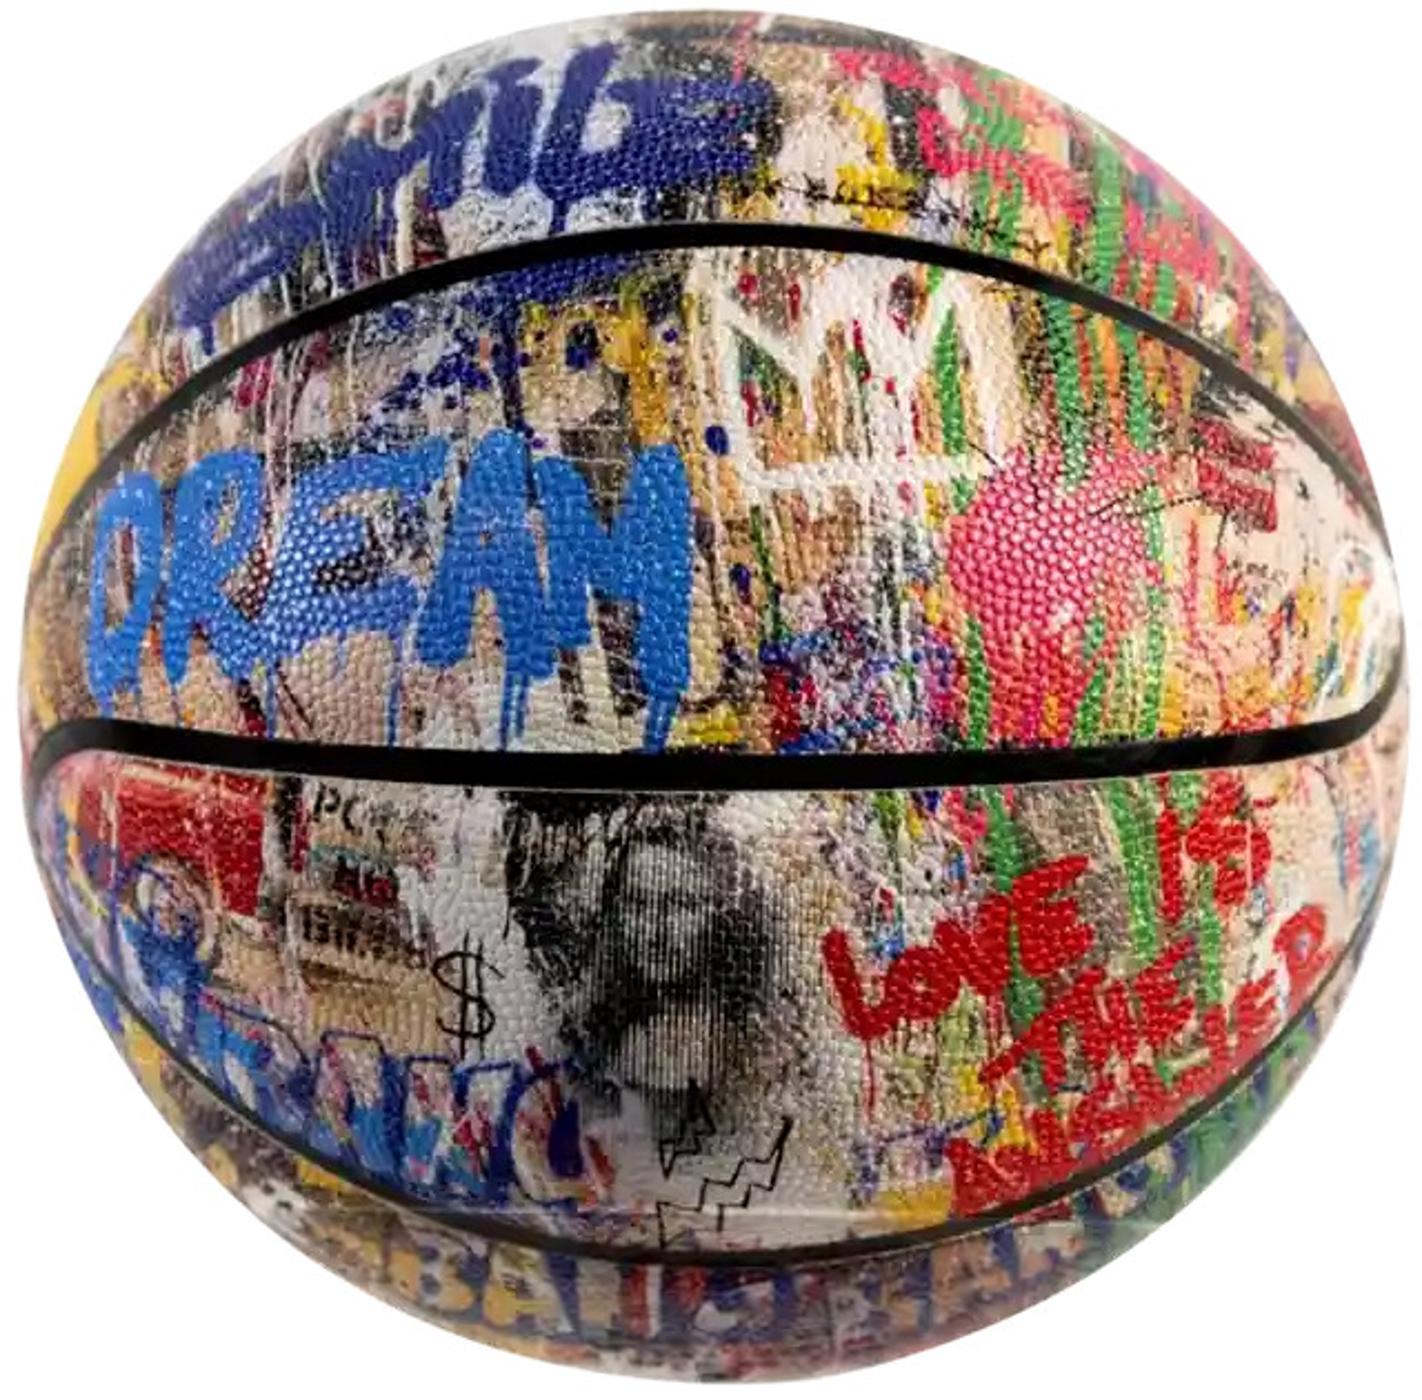 Basketball Collage

By Mr. Brainwash

Mr. Brainwash, whose real name is Thierry Guetta, is a French street artist and filmmaker known for his pop-inspired, graffiti-influenced artworks and gained widespread recognition through his role in the